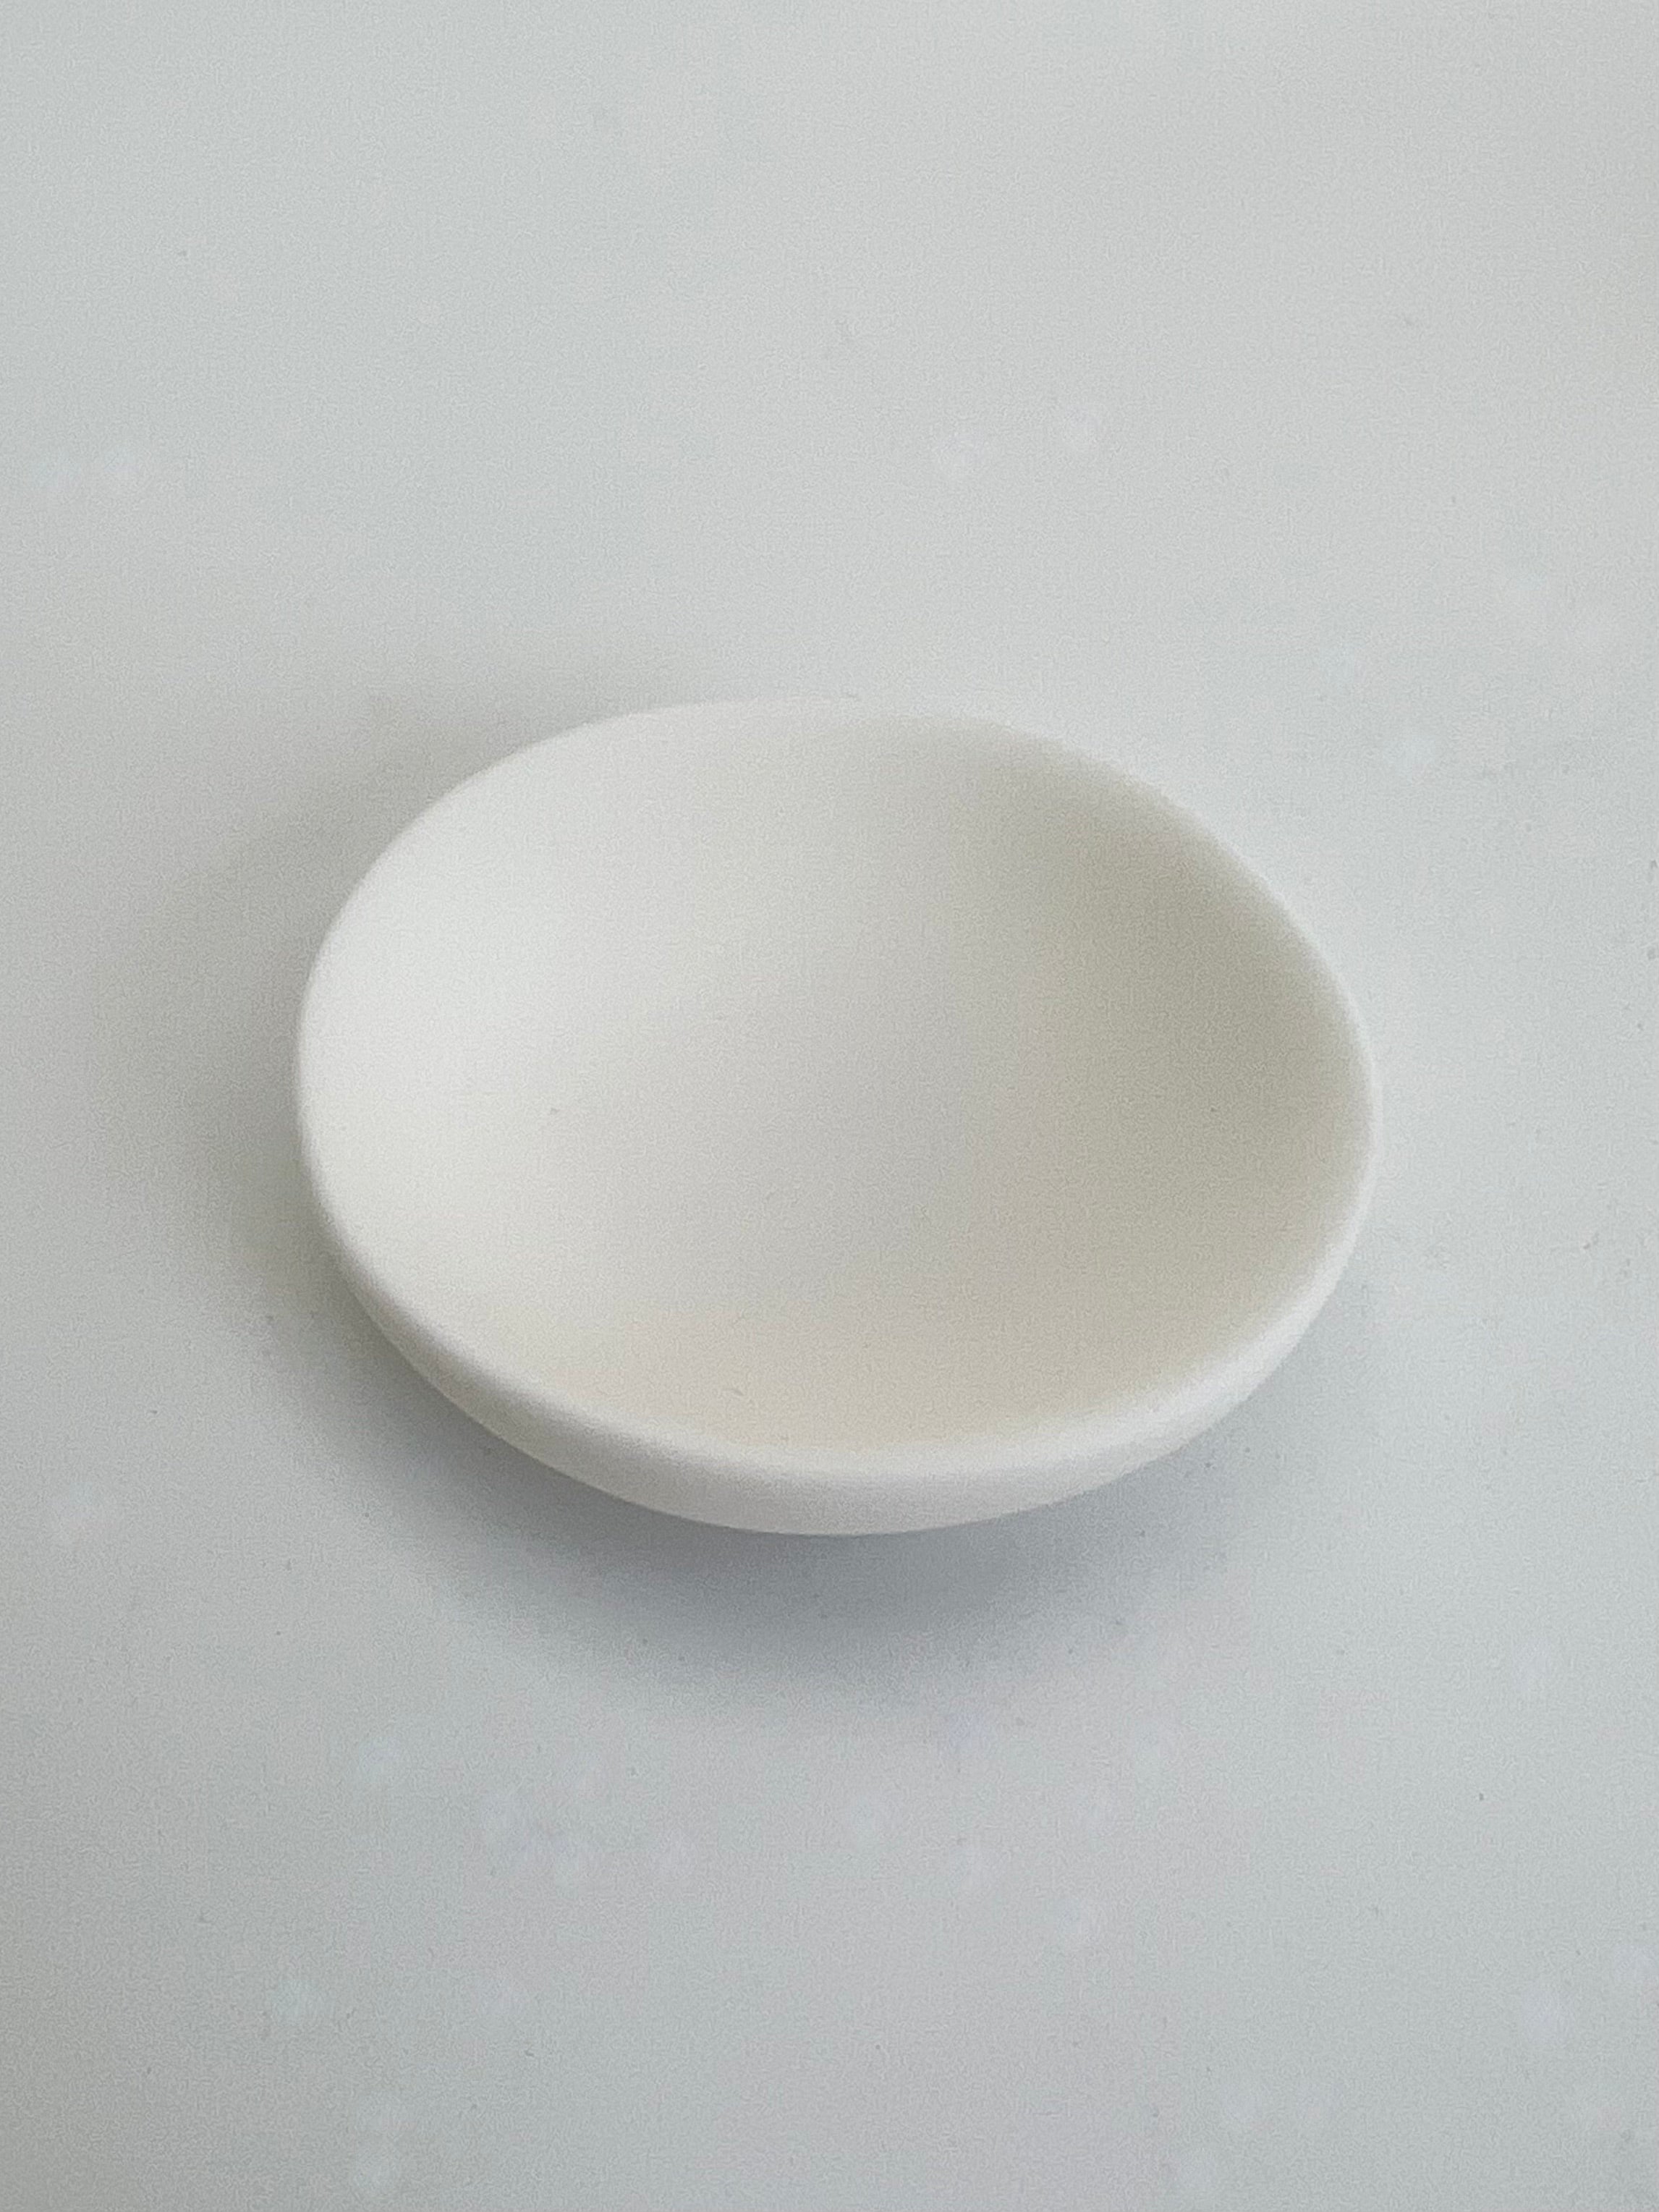 Sculpt Condiment Bowl in White by Tina Frey